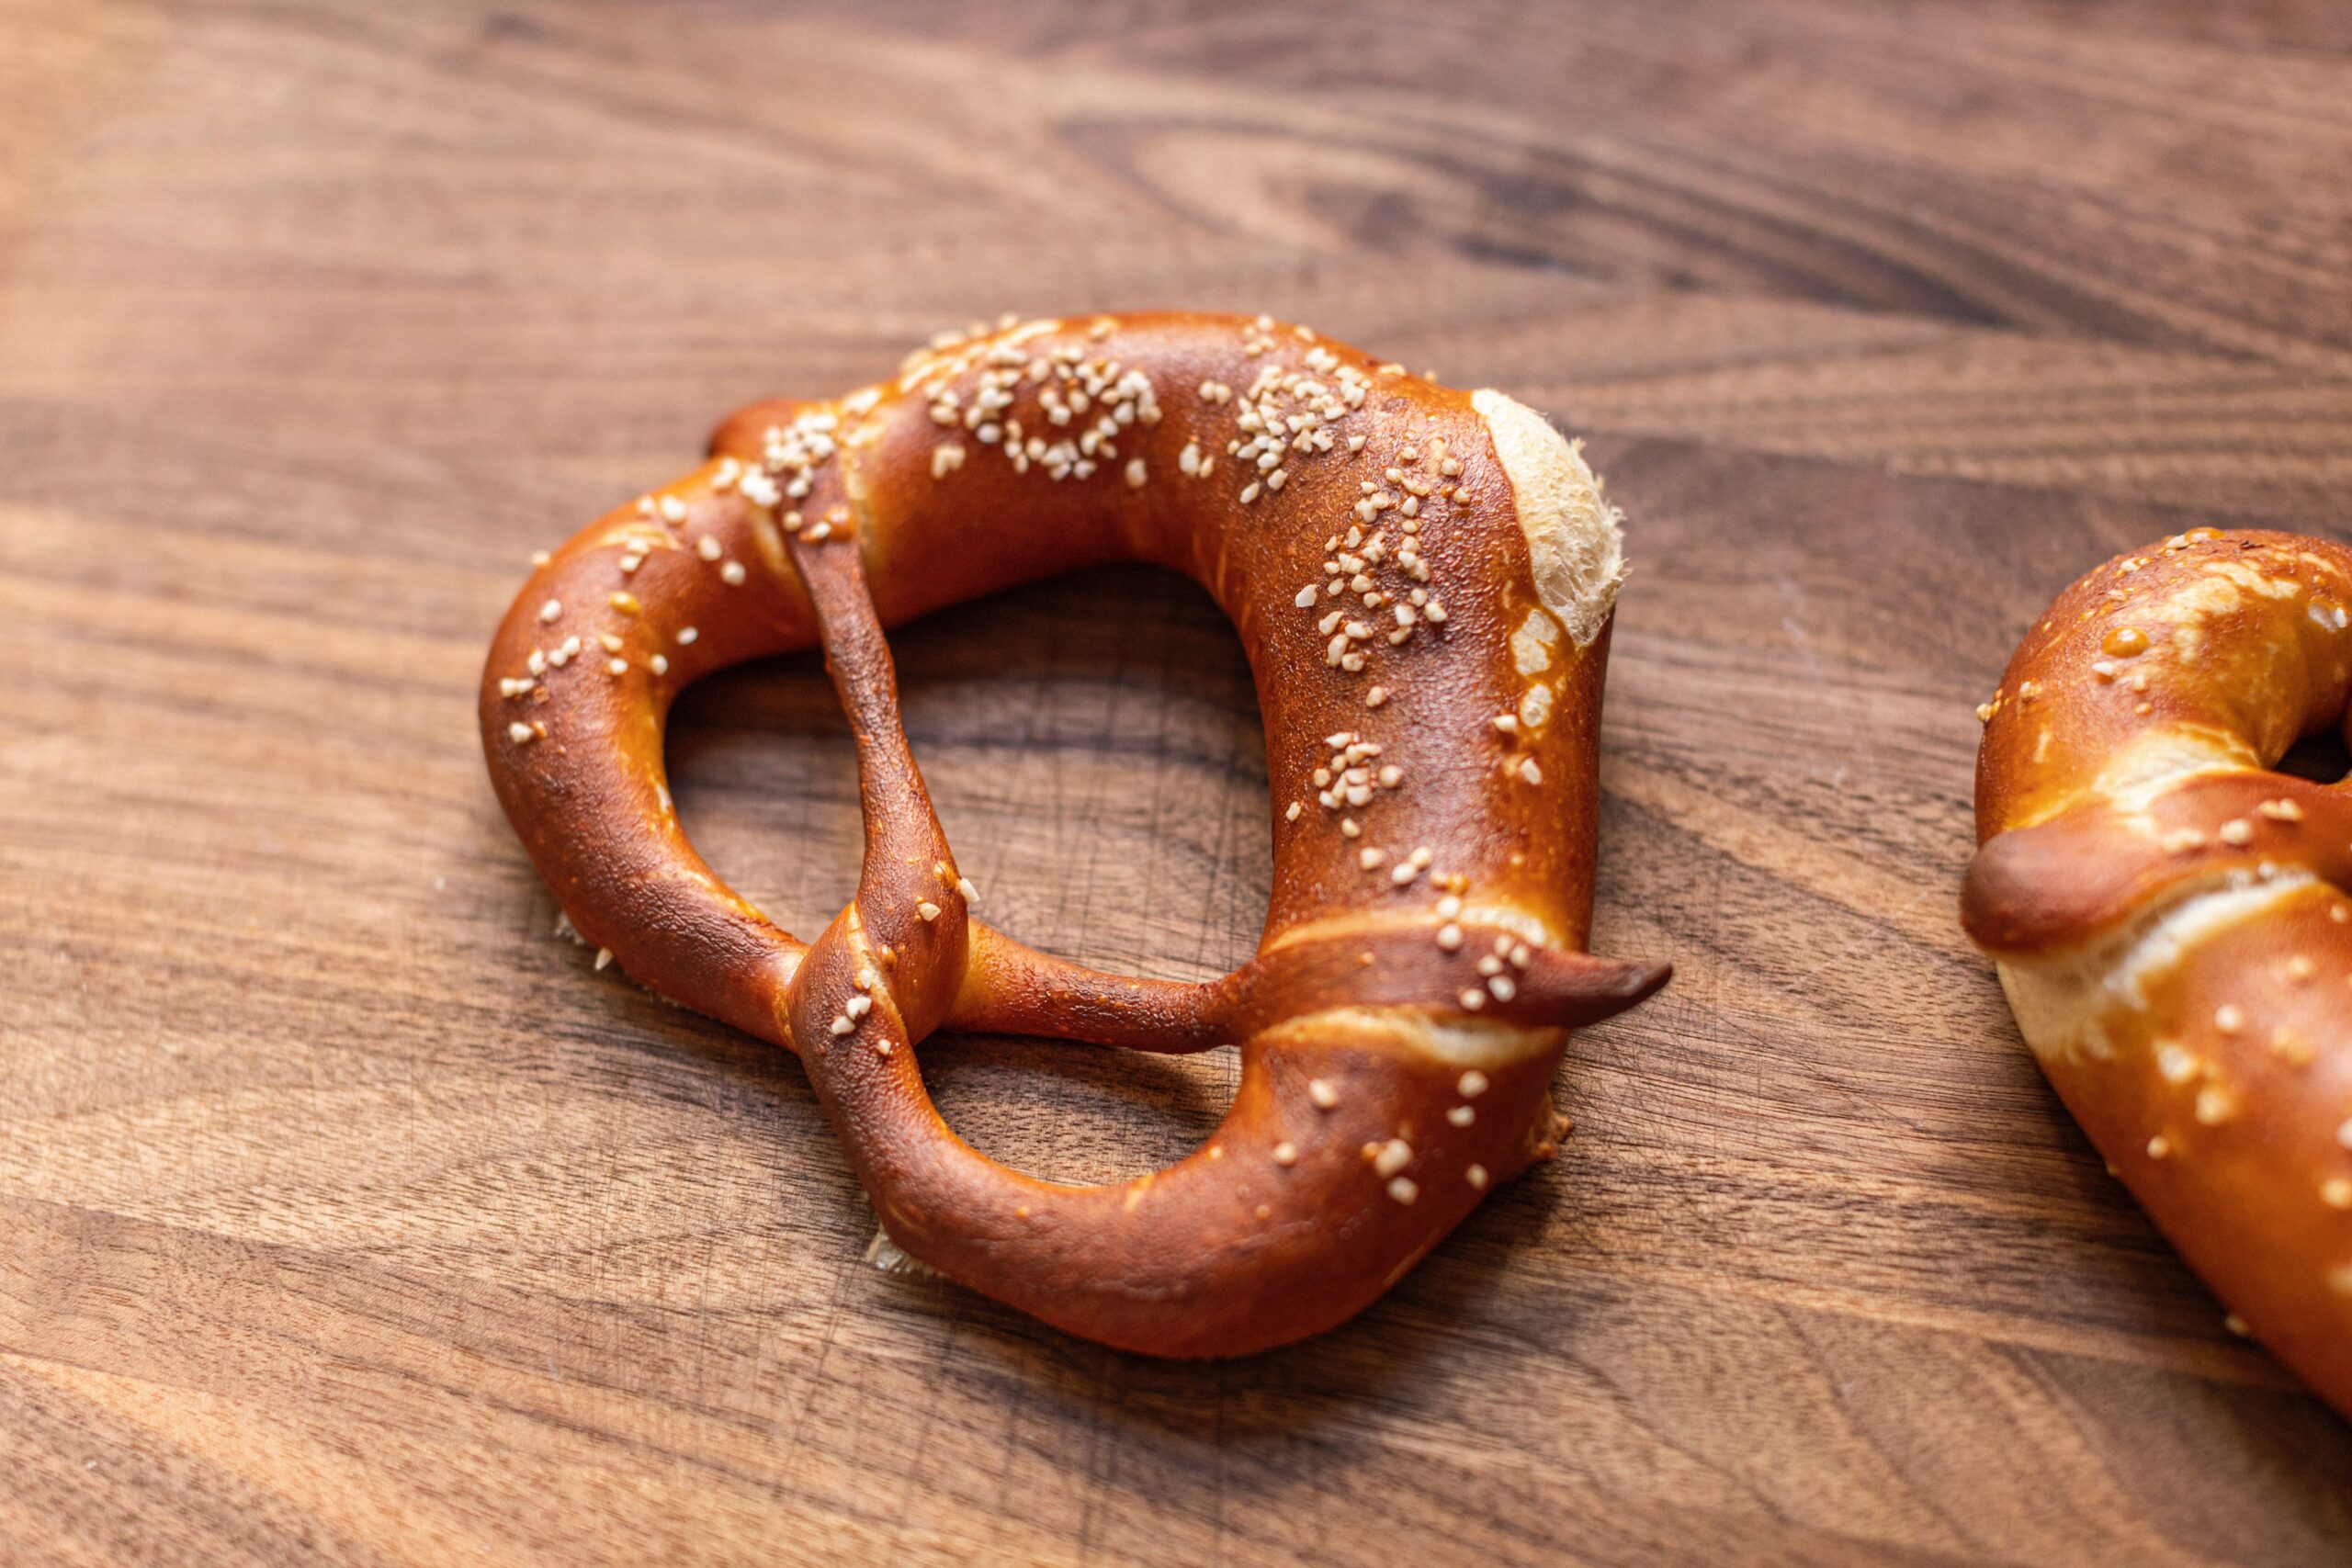 Are Pretzels Good For Weight loss Or Fattening? - Weight Loss Made